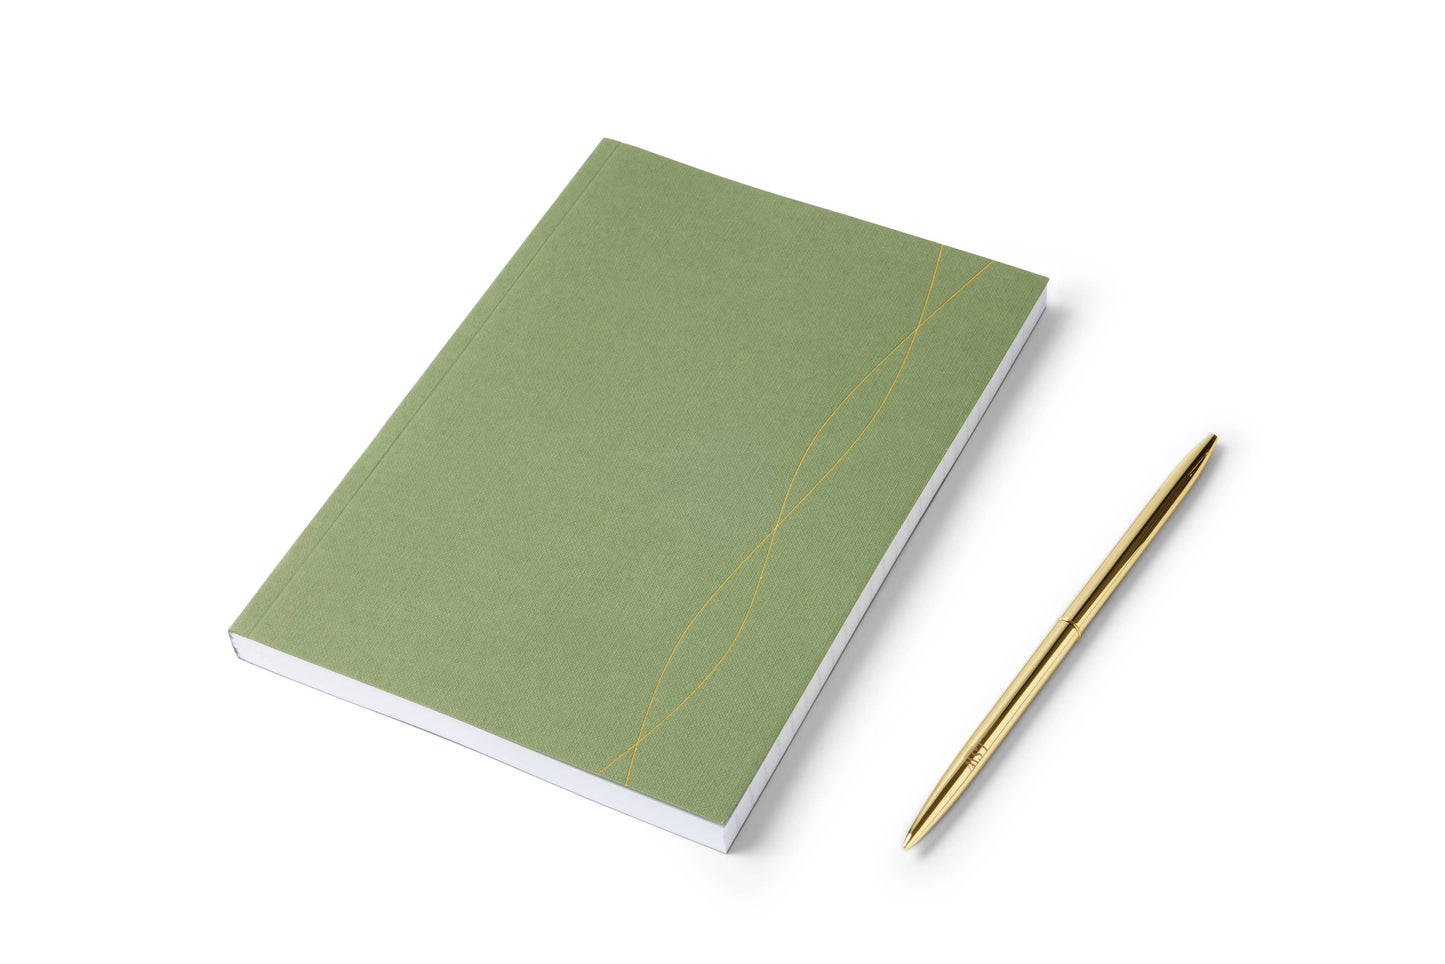 A5 Lined Notebooks in Mid-Green, Ruled Notepads, Stationery pre order arriving soon